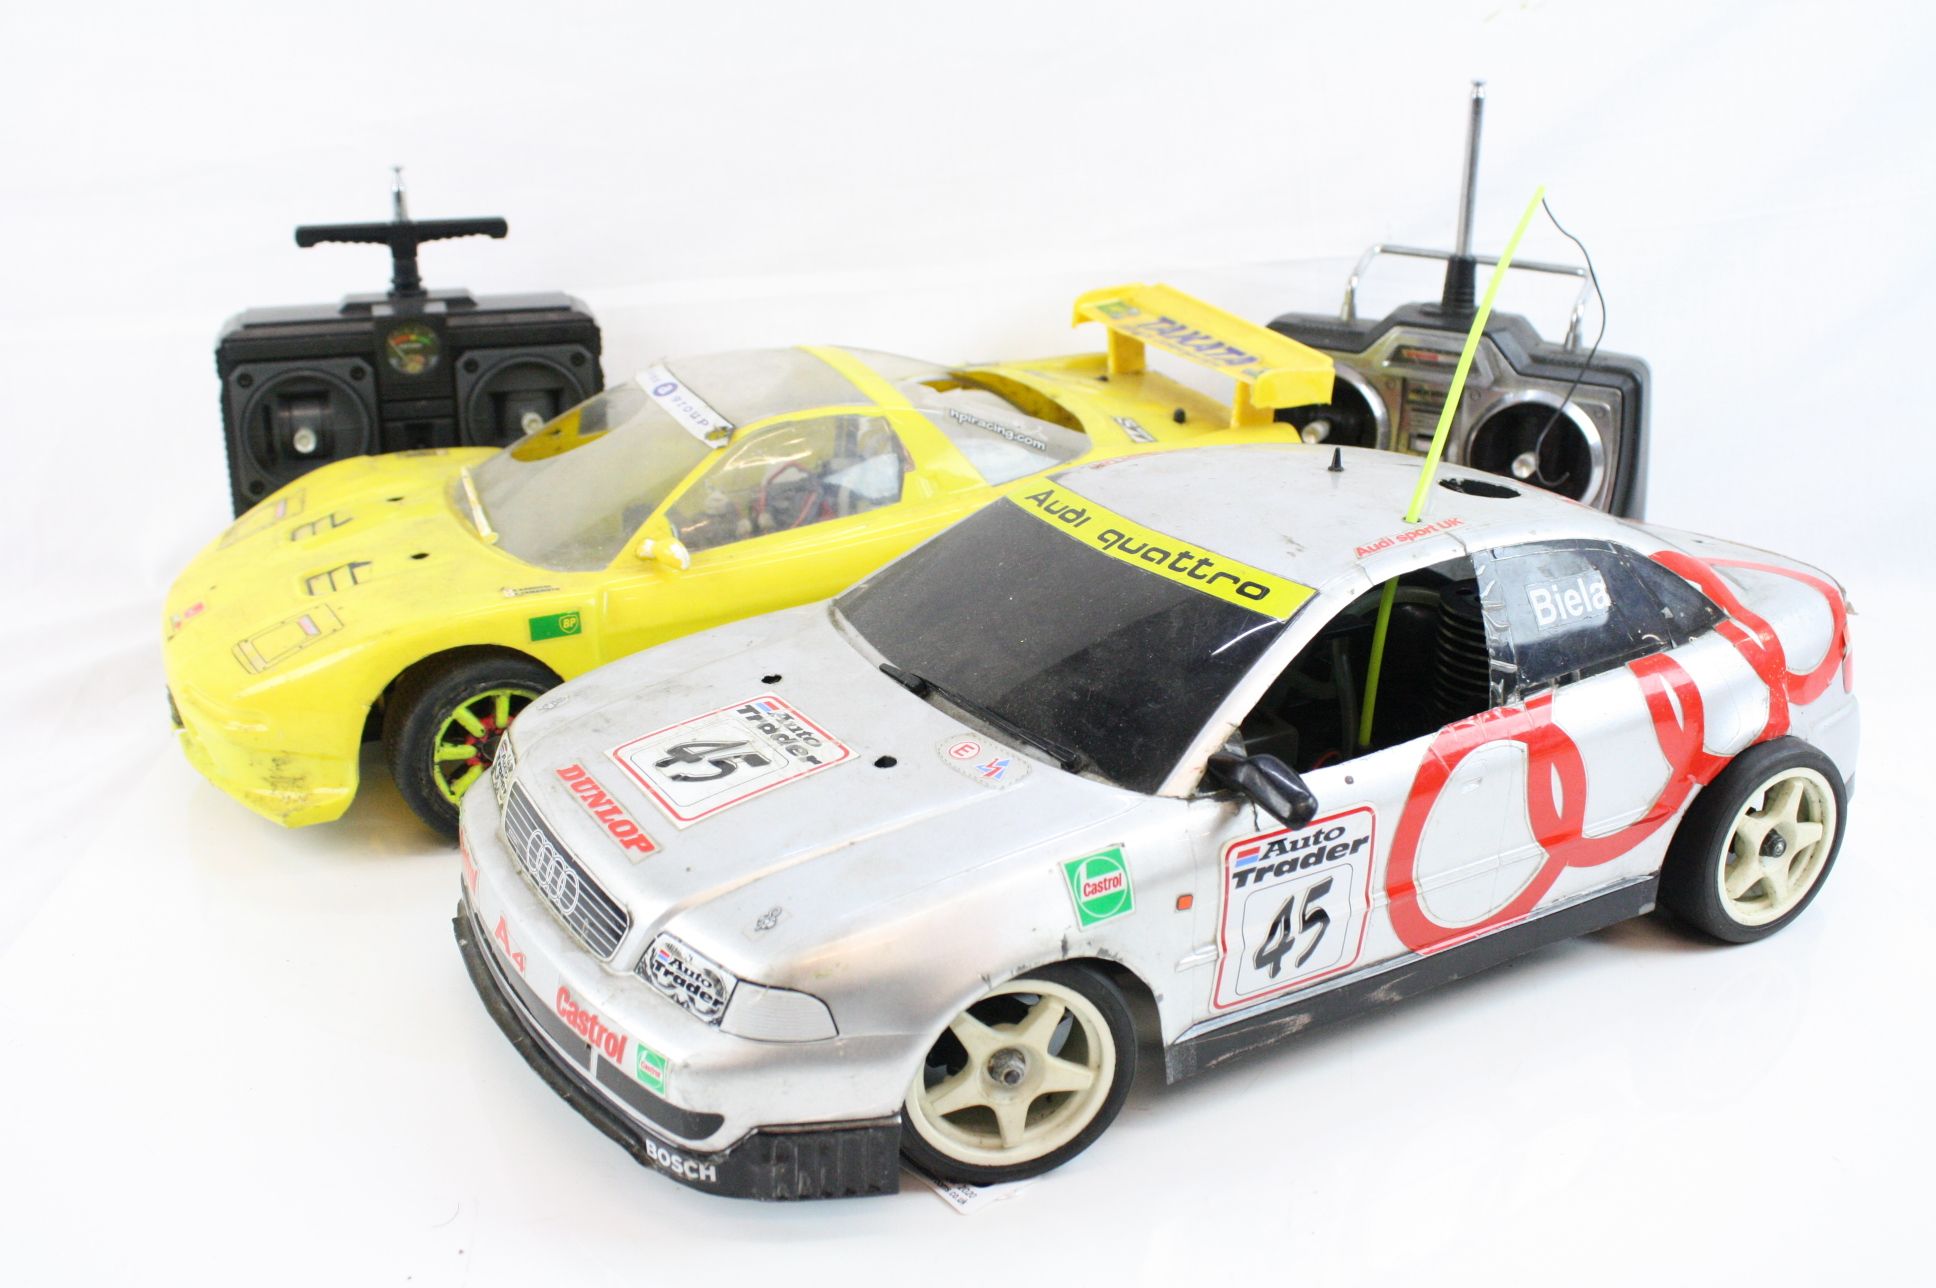 A Kyosho Nitro 4WD remote control car on an alloy chassis with a belt driven GX11X engine and a